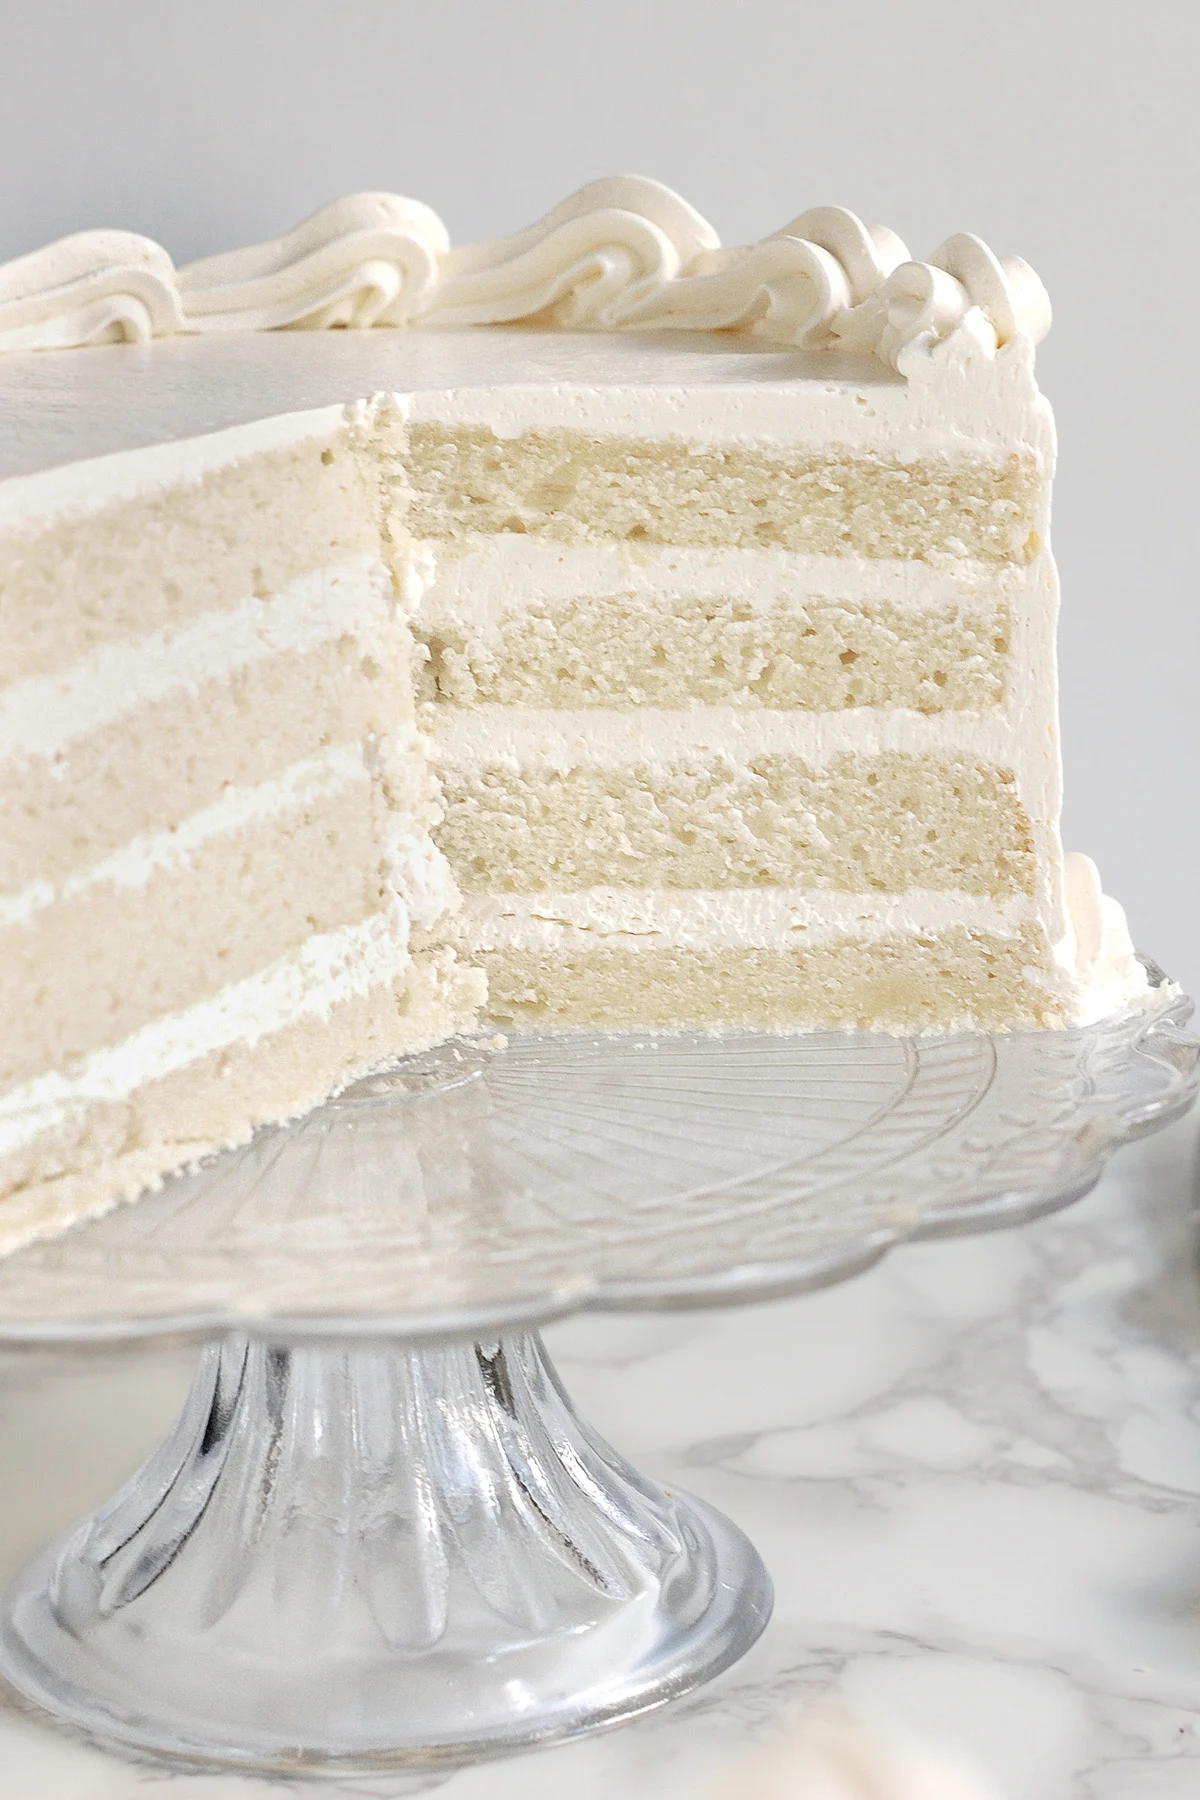 An cross section of a four layer velvety soft white cake 1/2 on a glass cake stand.